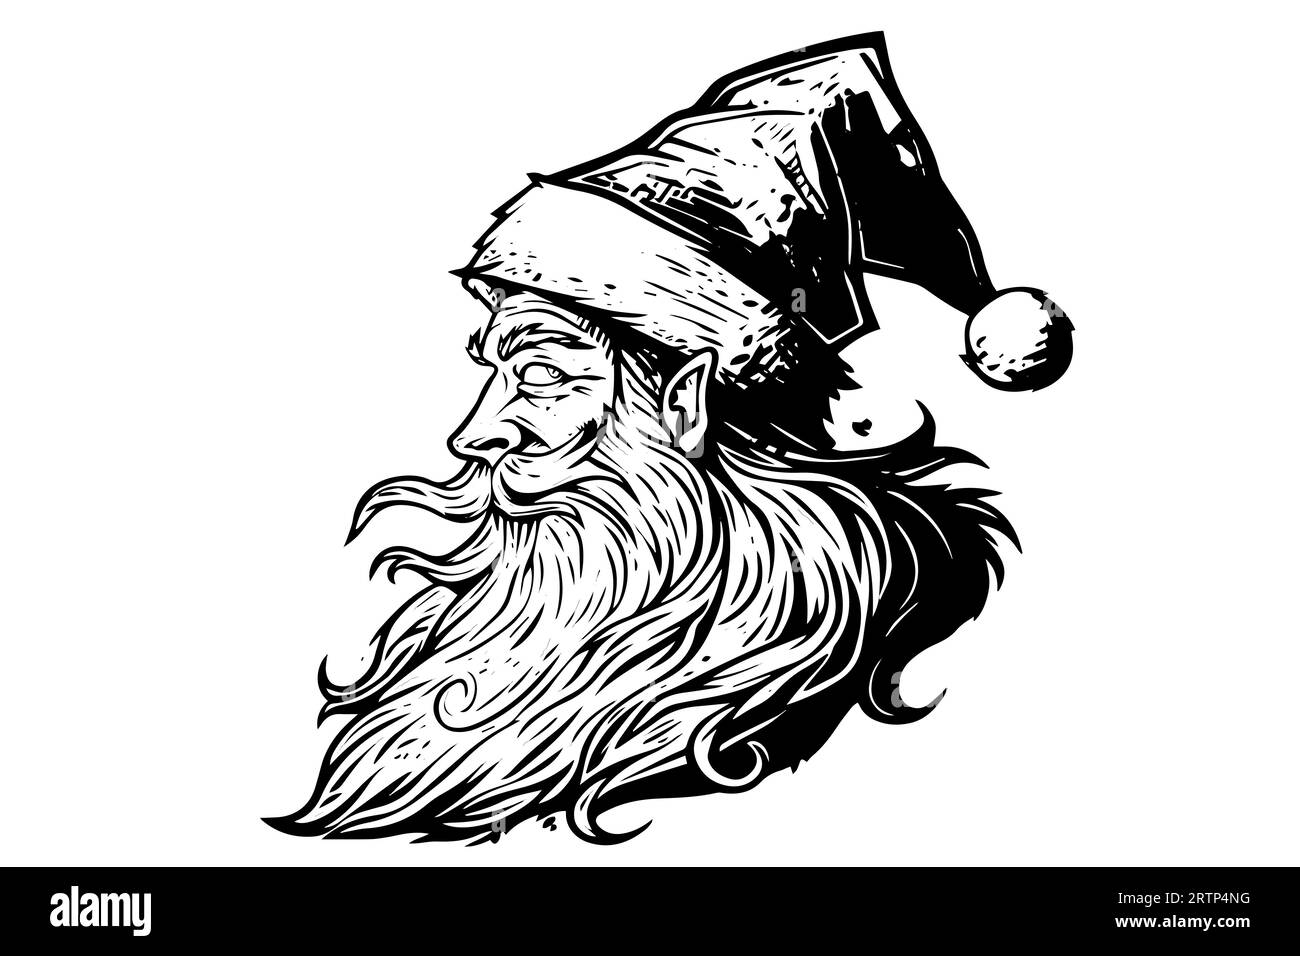 Santa Claus head in a hat sketch hand drawn in engraving style vector illustration. Stock Vector